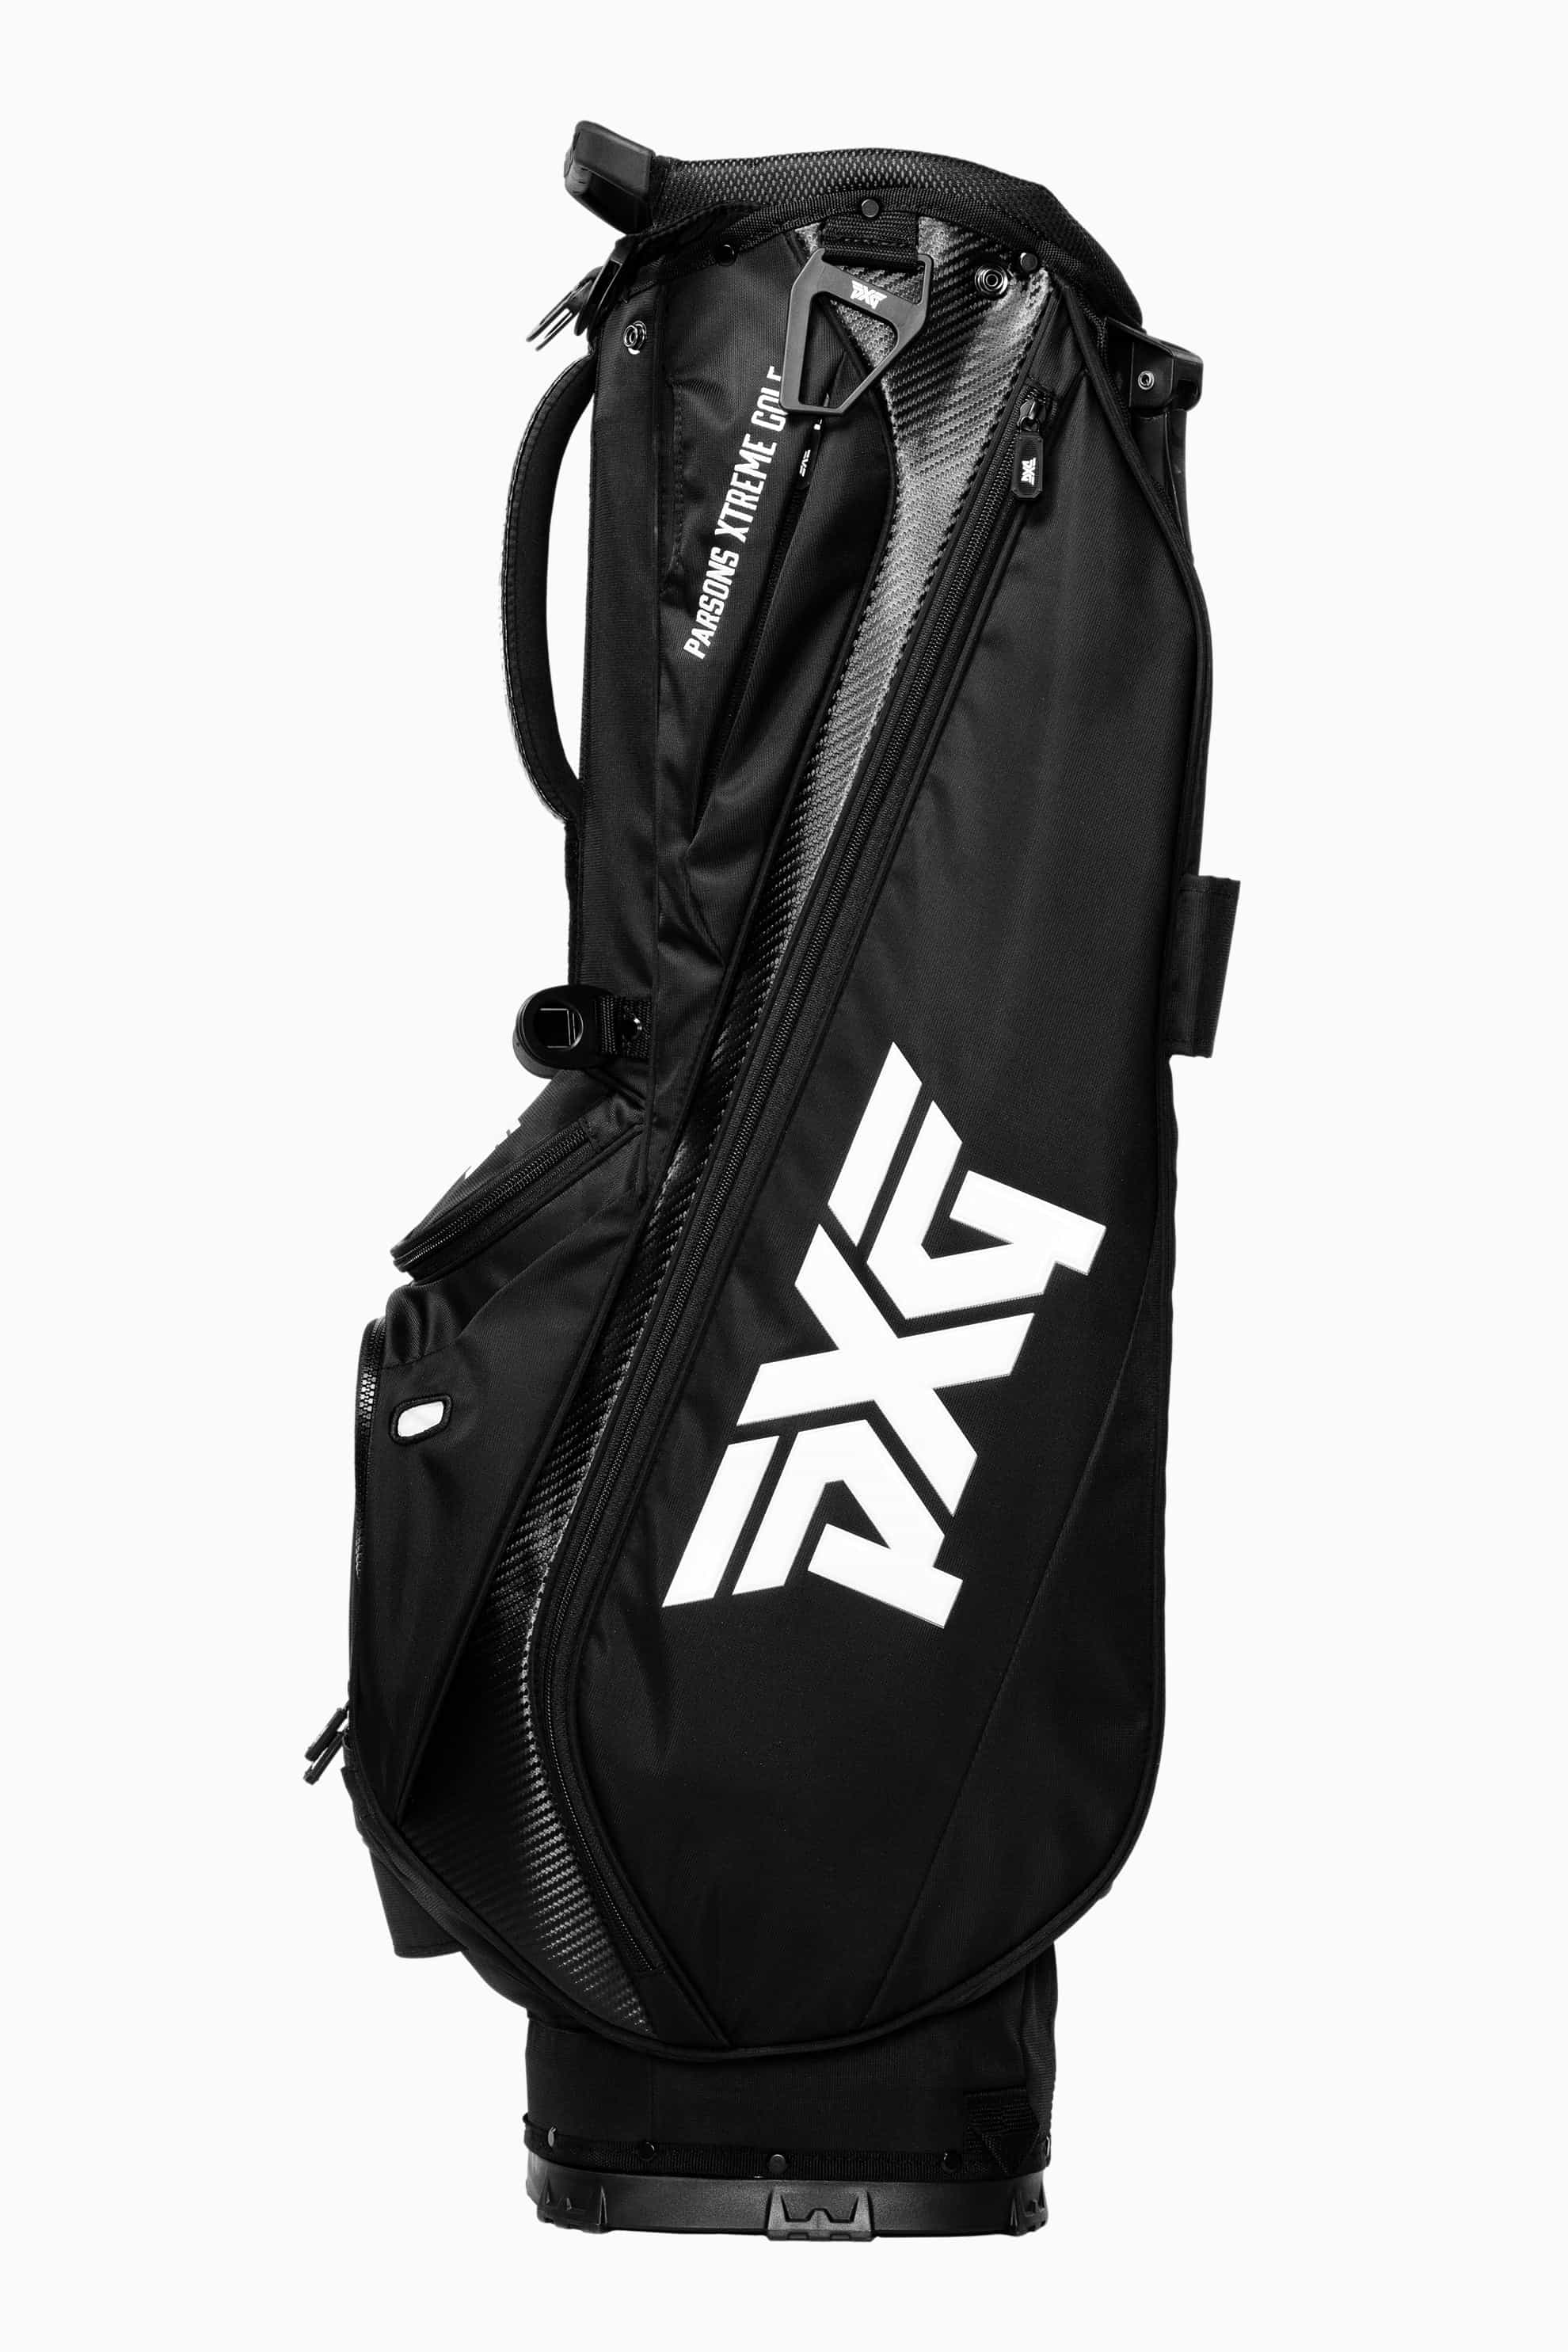 Darkness Pants  Shop the Highest Quality Golf Apparel, Gear, Accessories  and Golf Clubs at PXG